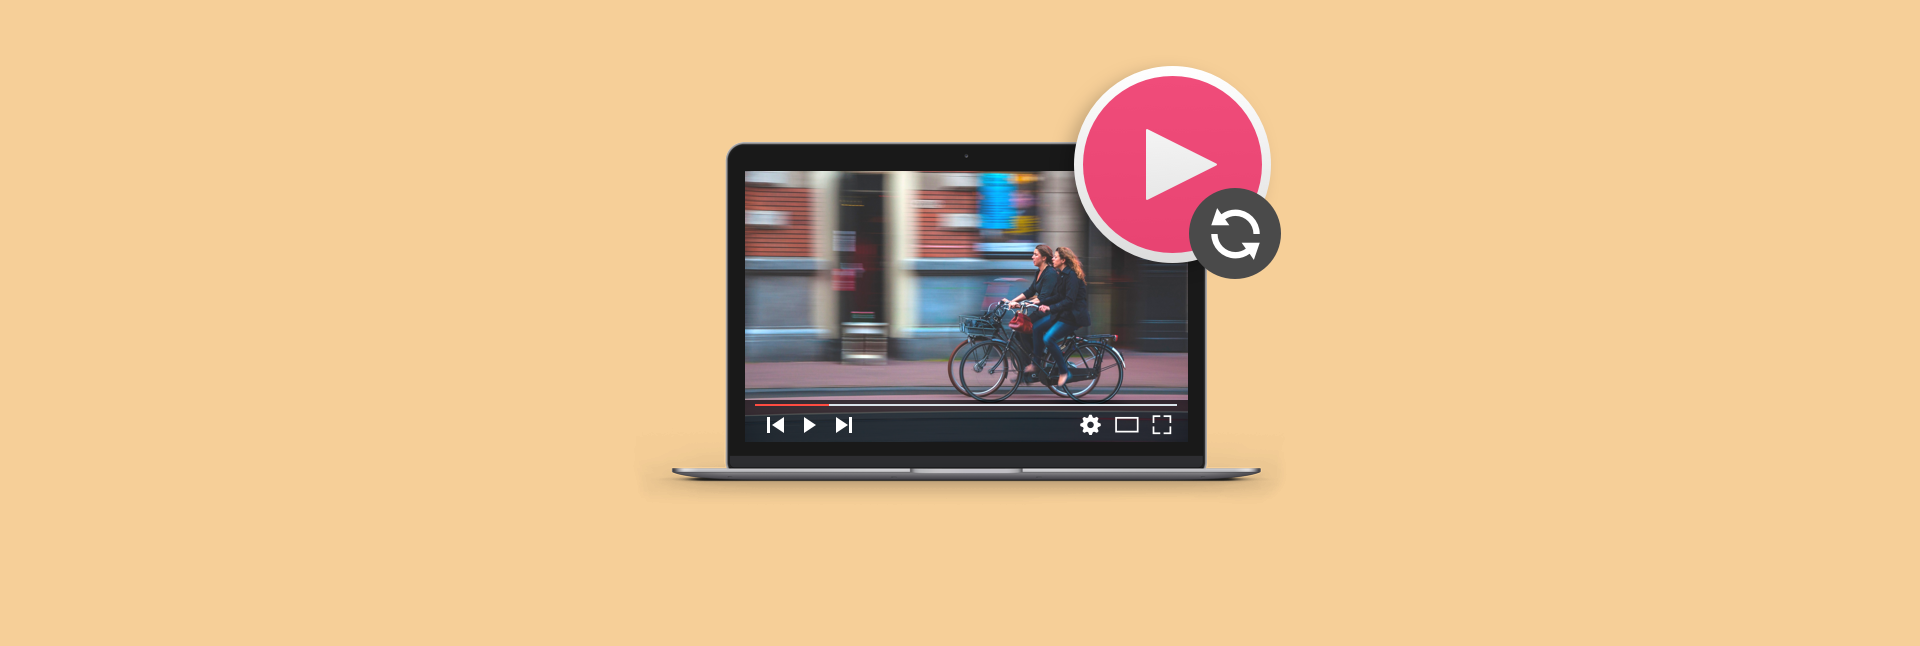 repeat - Easily loop  videos - Listen to music without  interruption